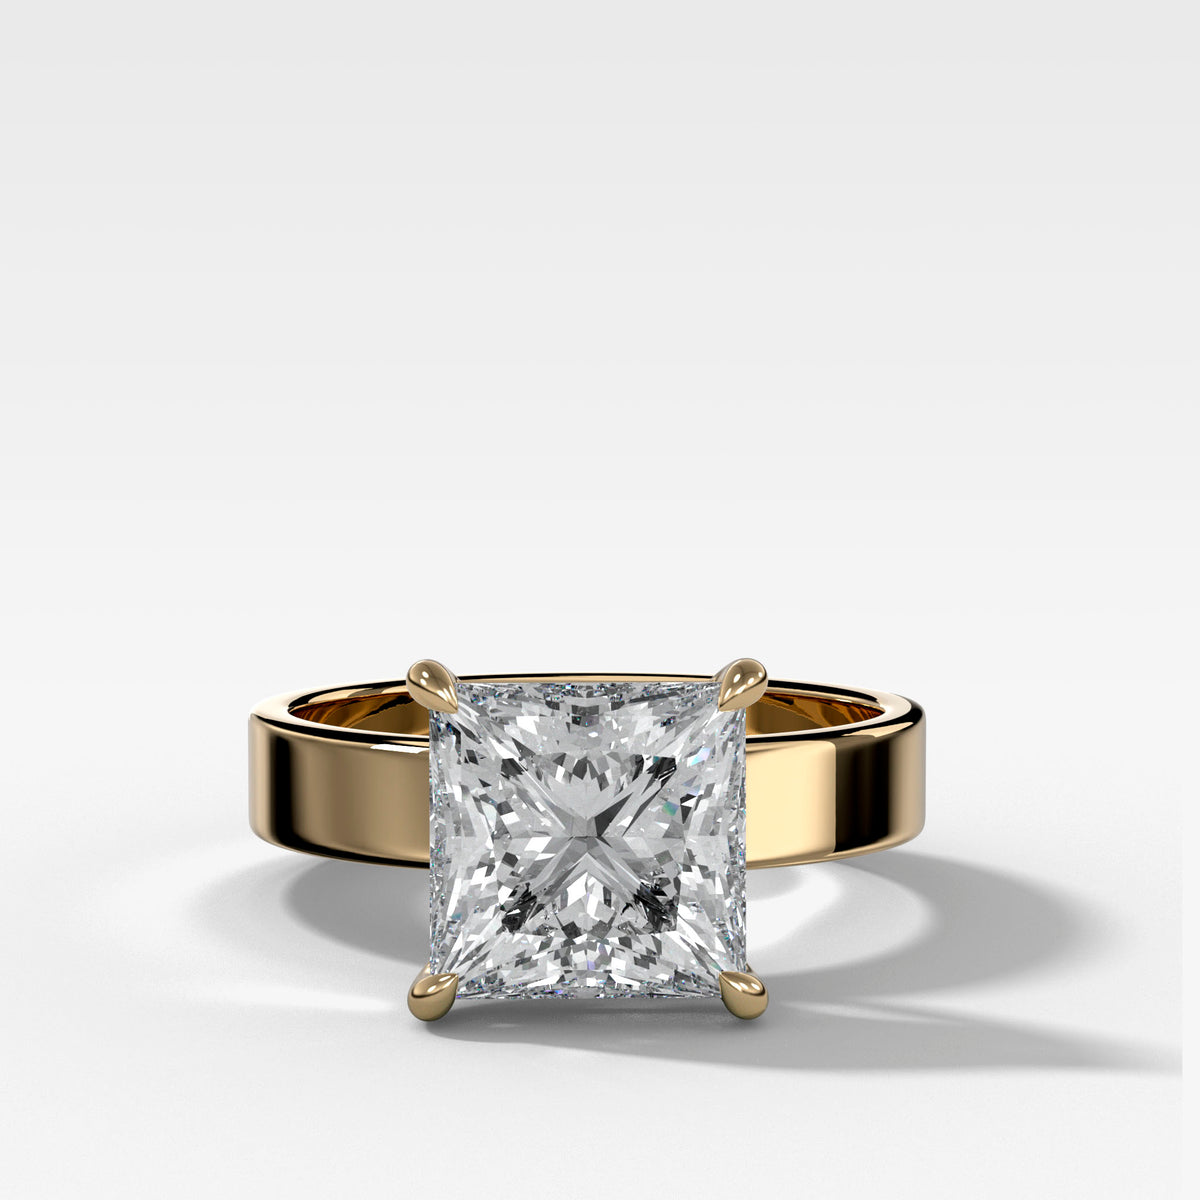 Finest Solitaire Engagement Ring With Princess Cut Diamond